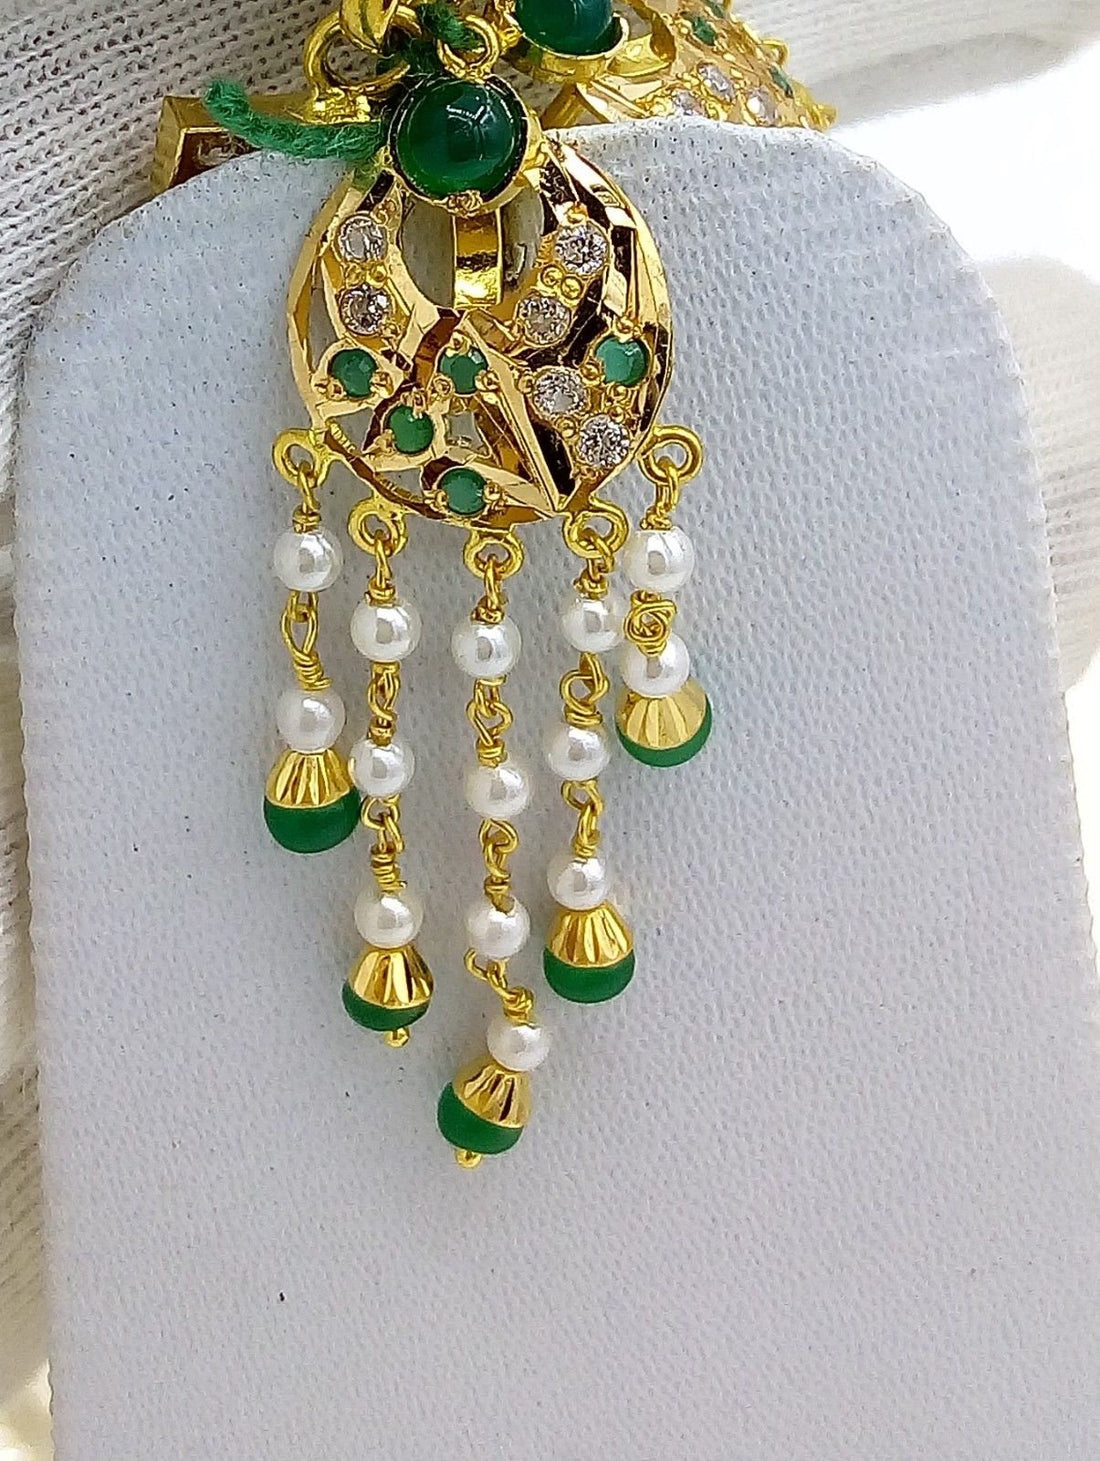 Muslim Pearl bead necklace 22k 22ct gold emerald color loose set with earrings green - TRIBAL ORNAMENTS